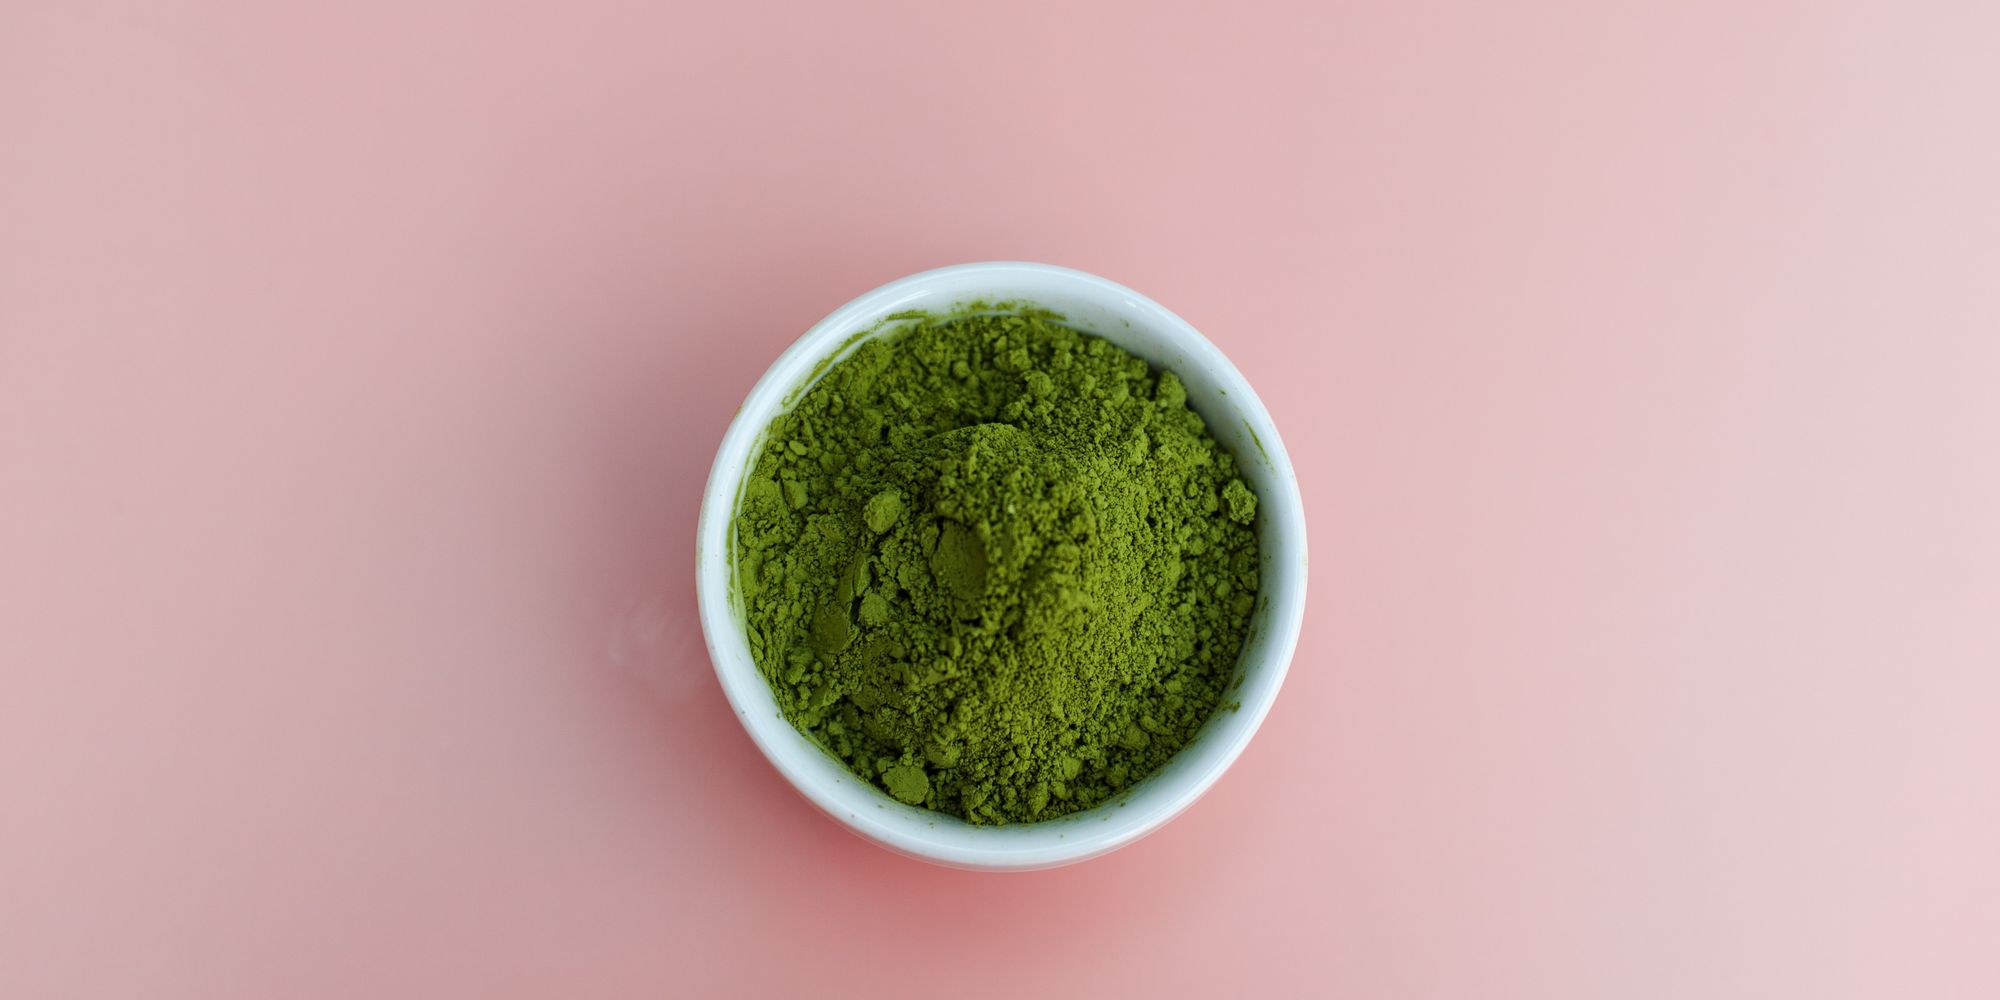 Cover Image for What Are the Benefits of Matcha?